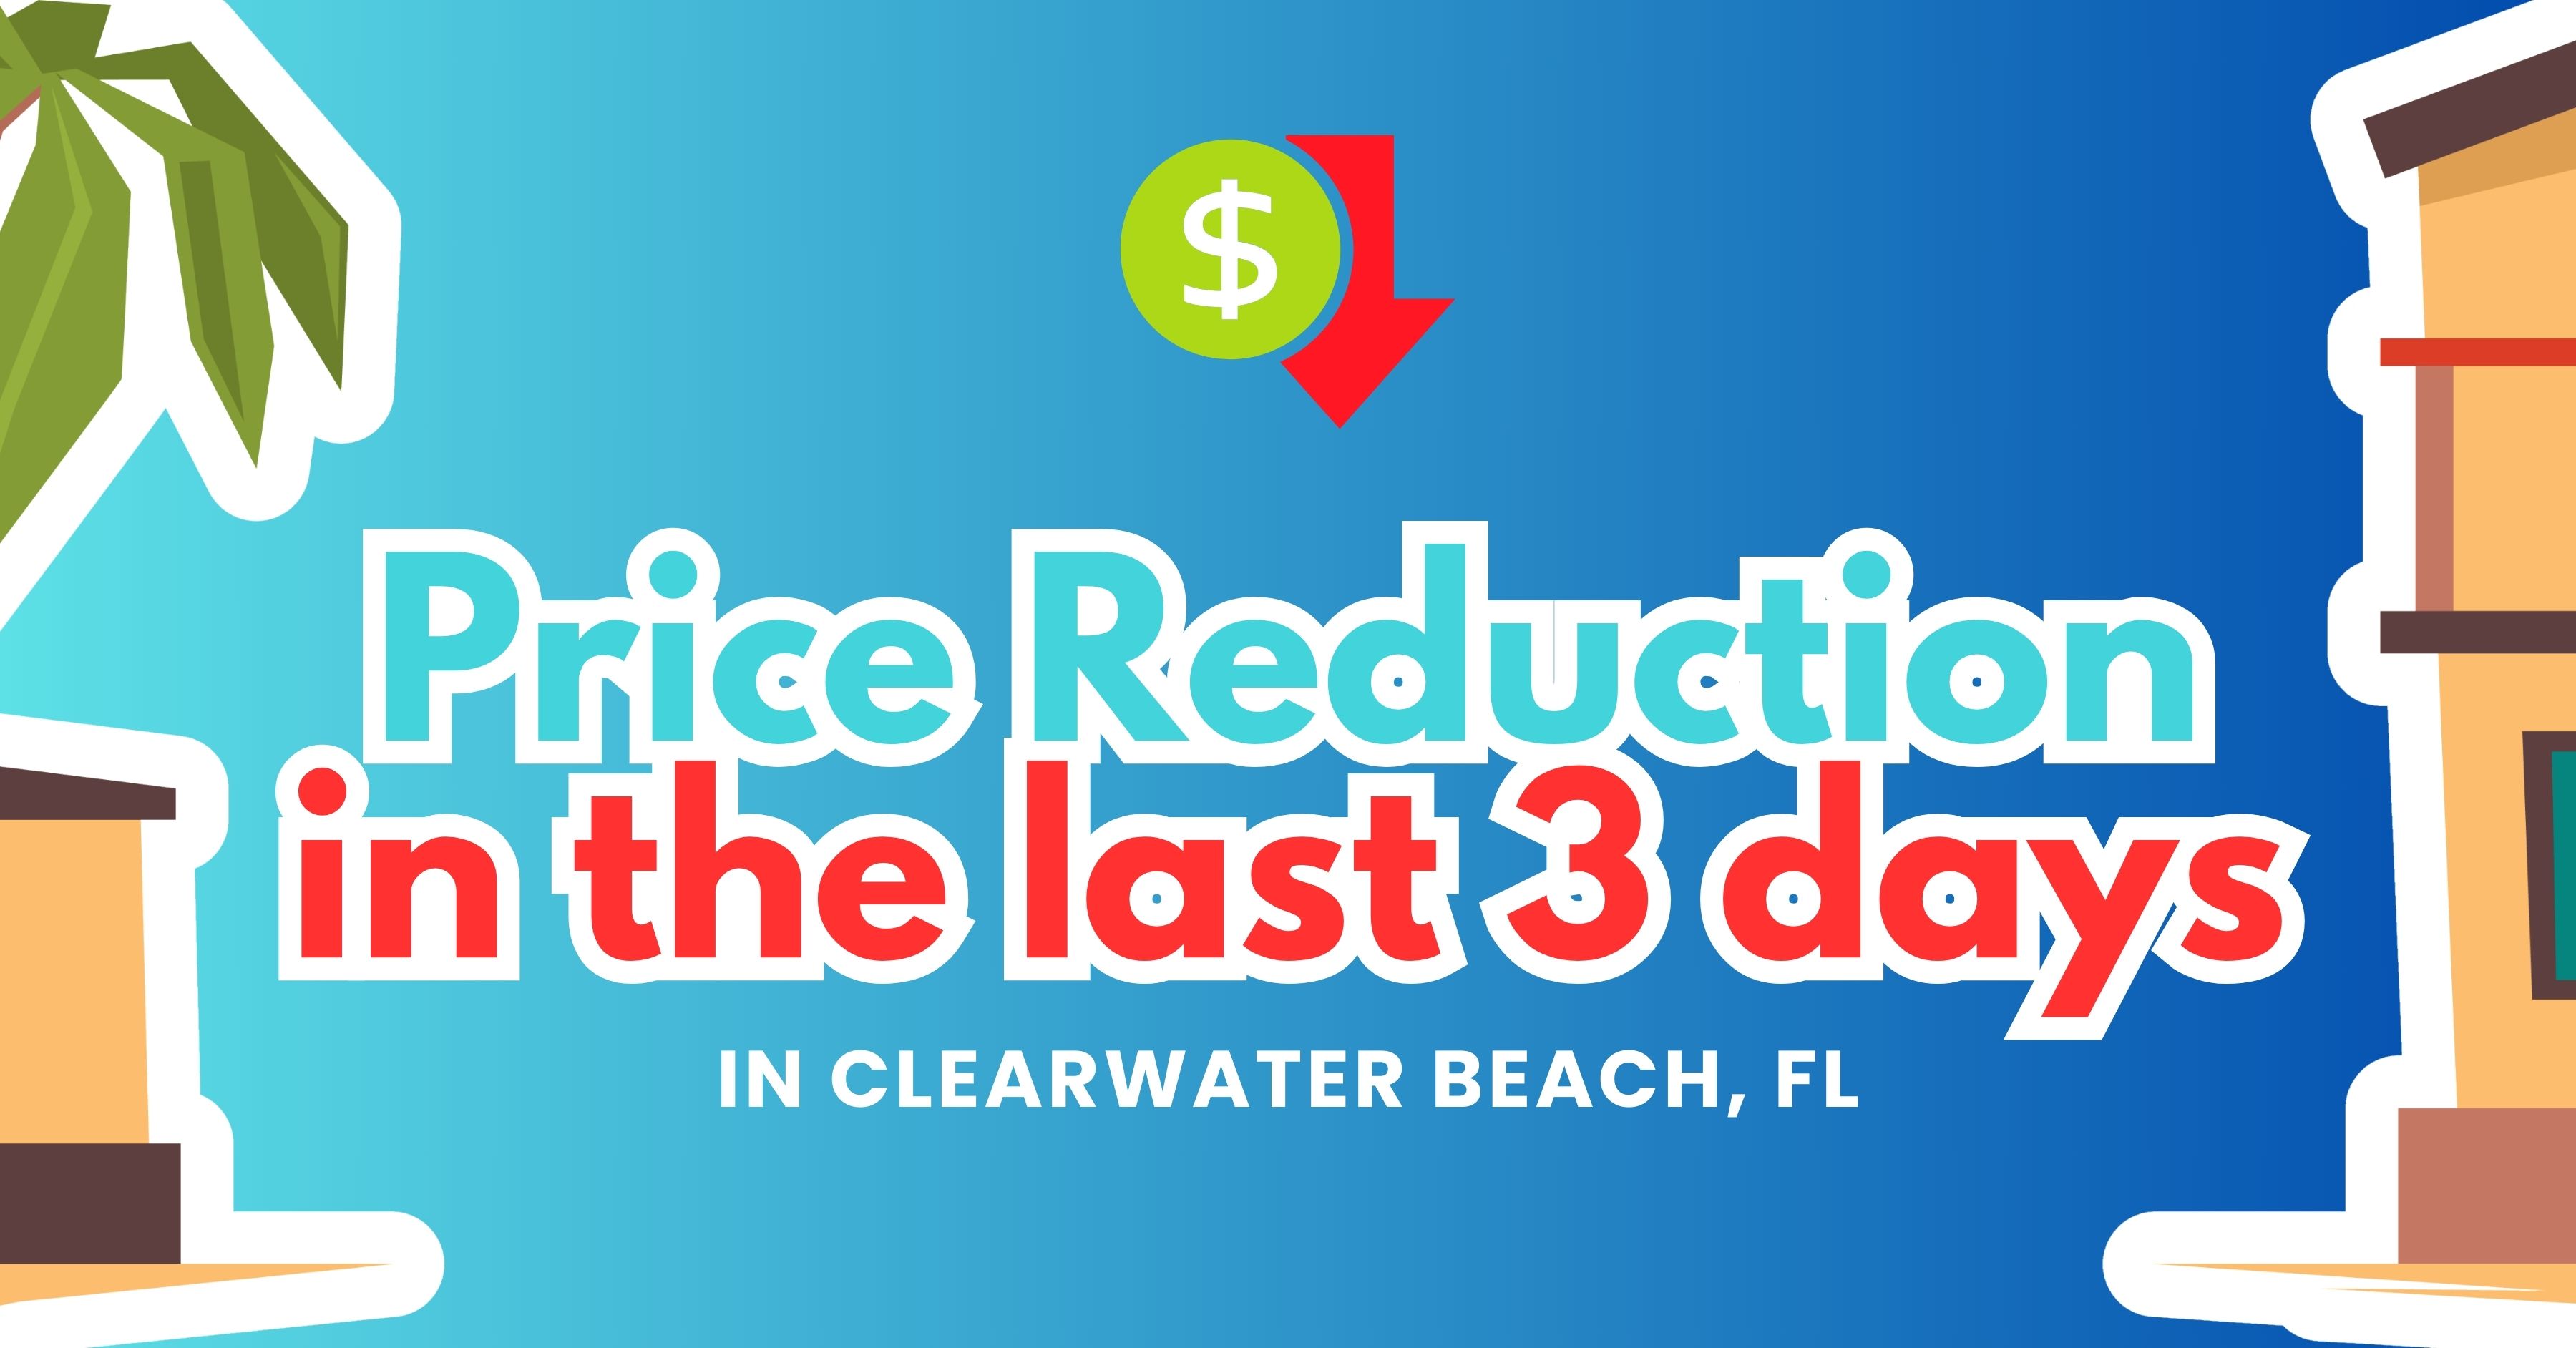 Price Reduction in the last 3 days in Clearwater Beach, FL